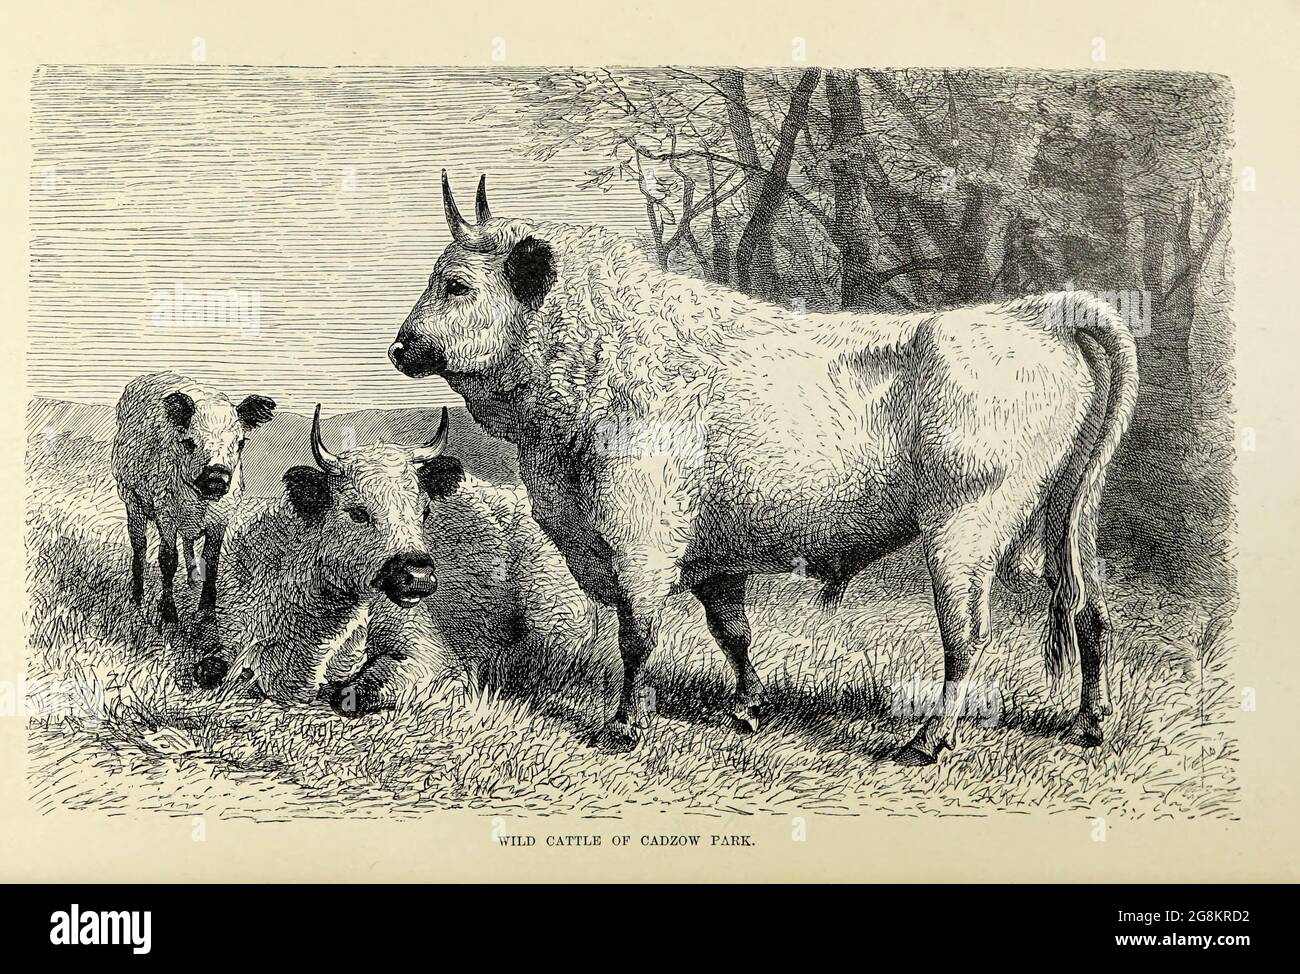 Wild Cattle of Cadzow Park in Scotland From the book ' Royal Natural History ' Volume 2 Edited by Richard Lydekker, Published in London by Frederick Warne & Co in 1893-1894 Stock Photo